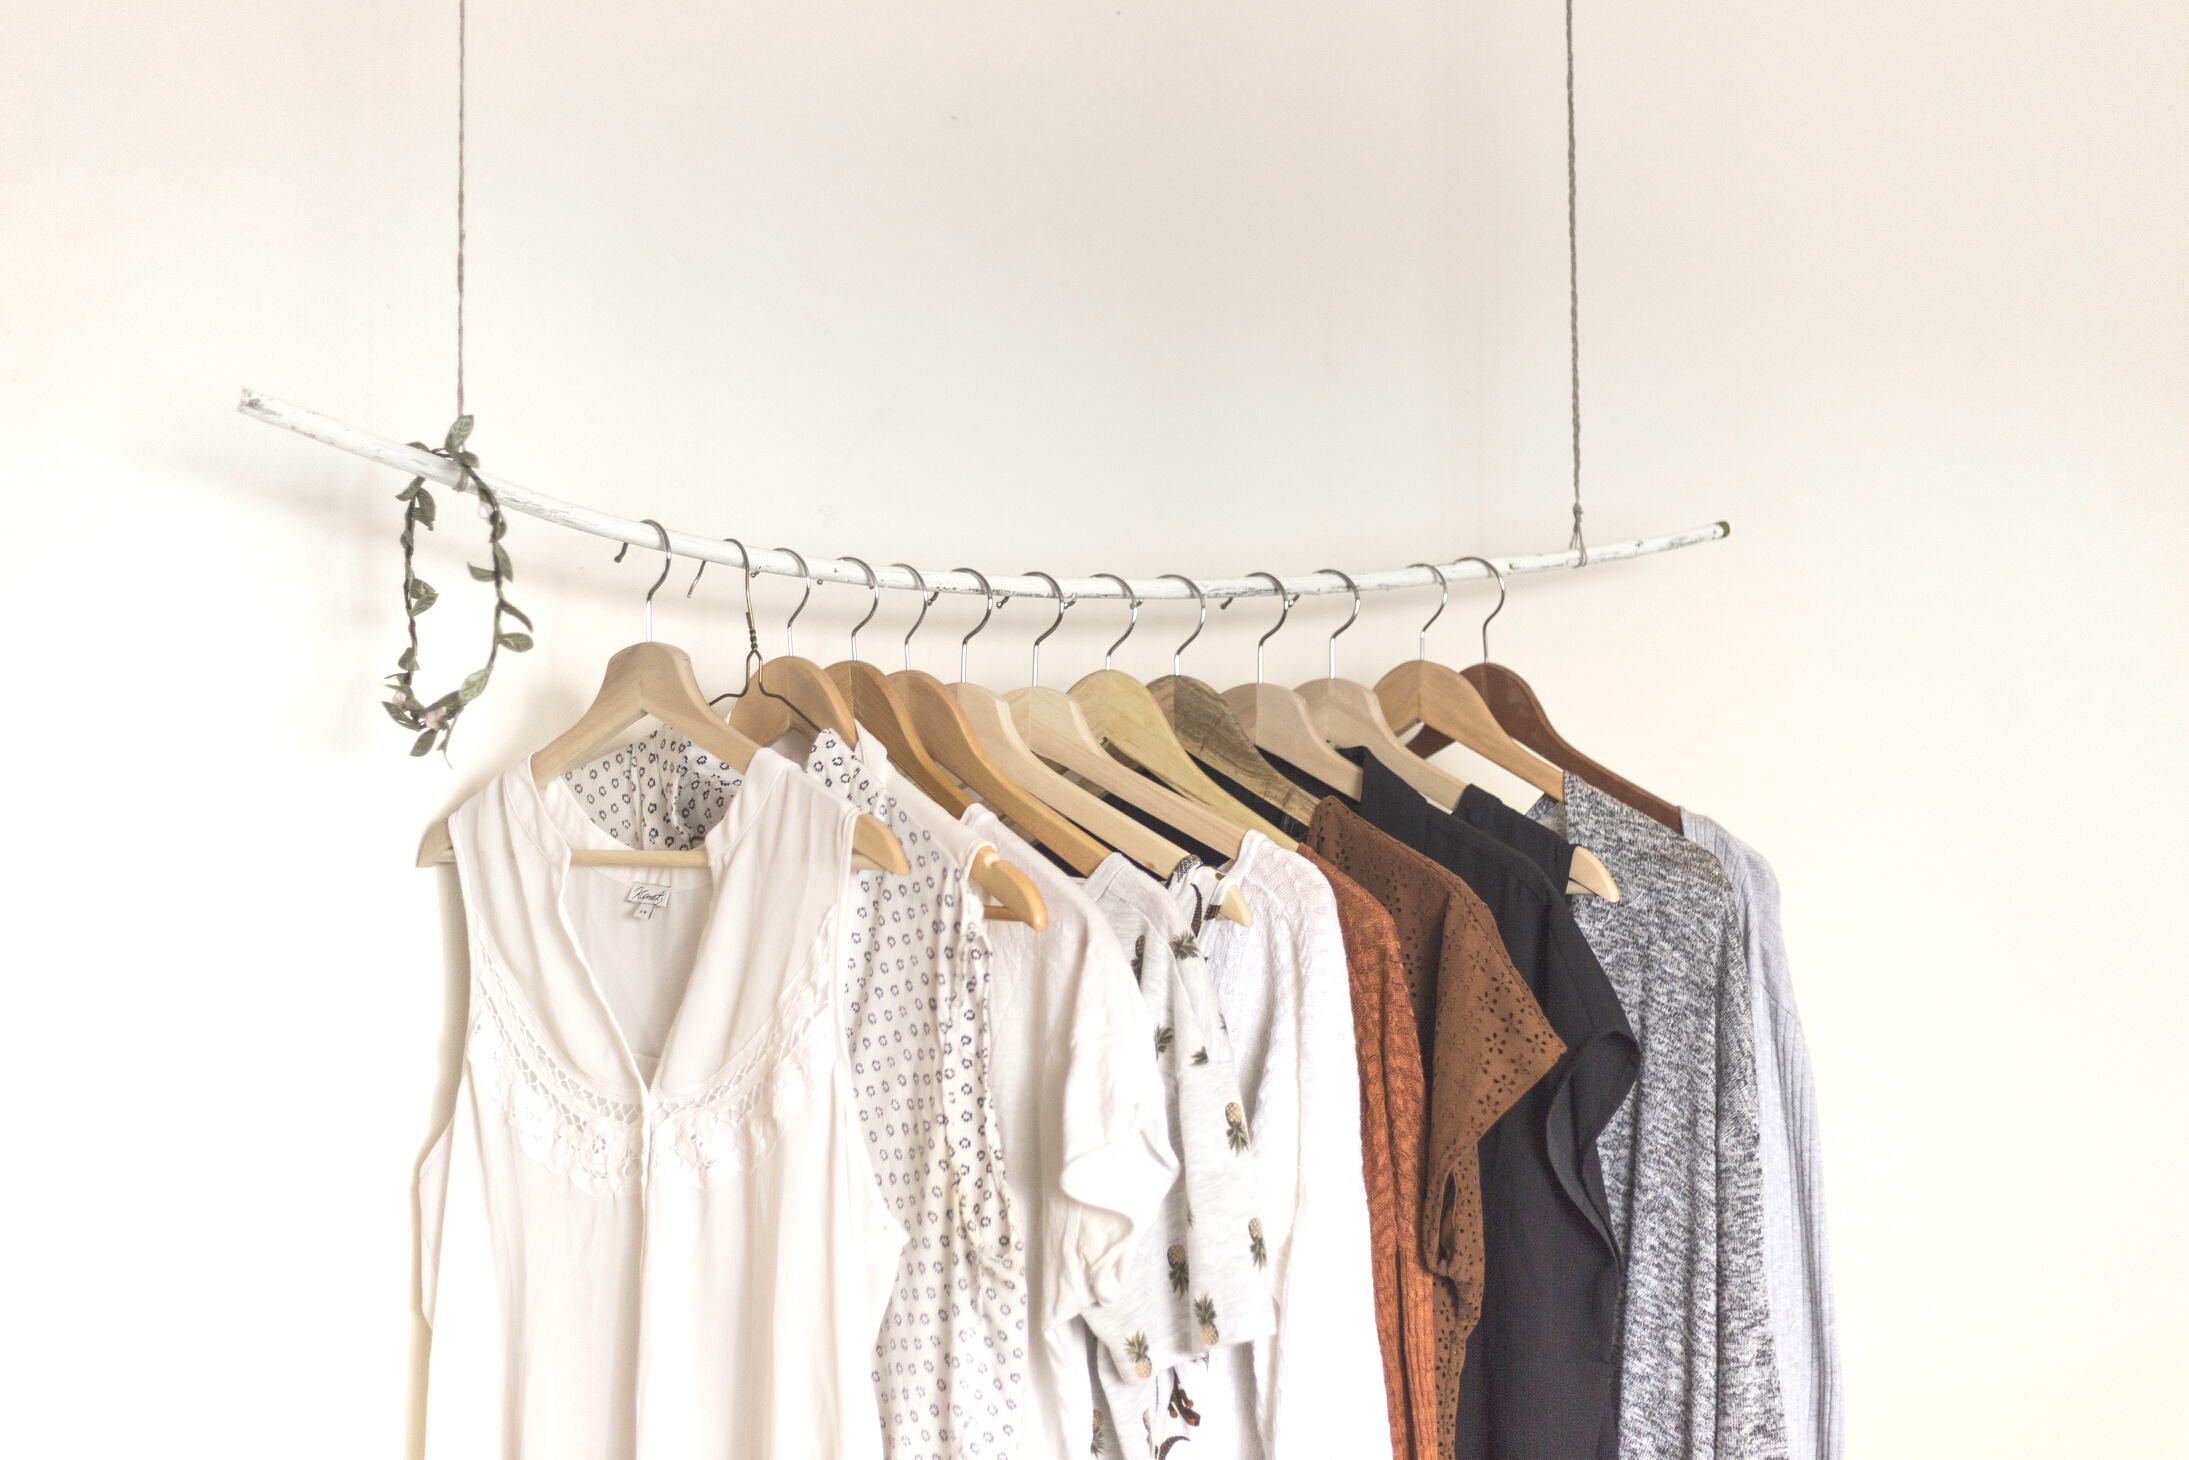 Women's Clothes Hanging on a Rack